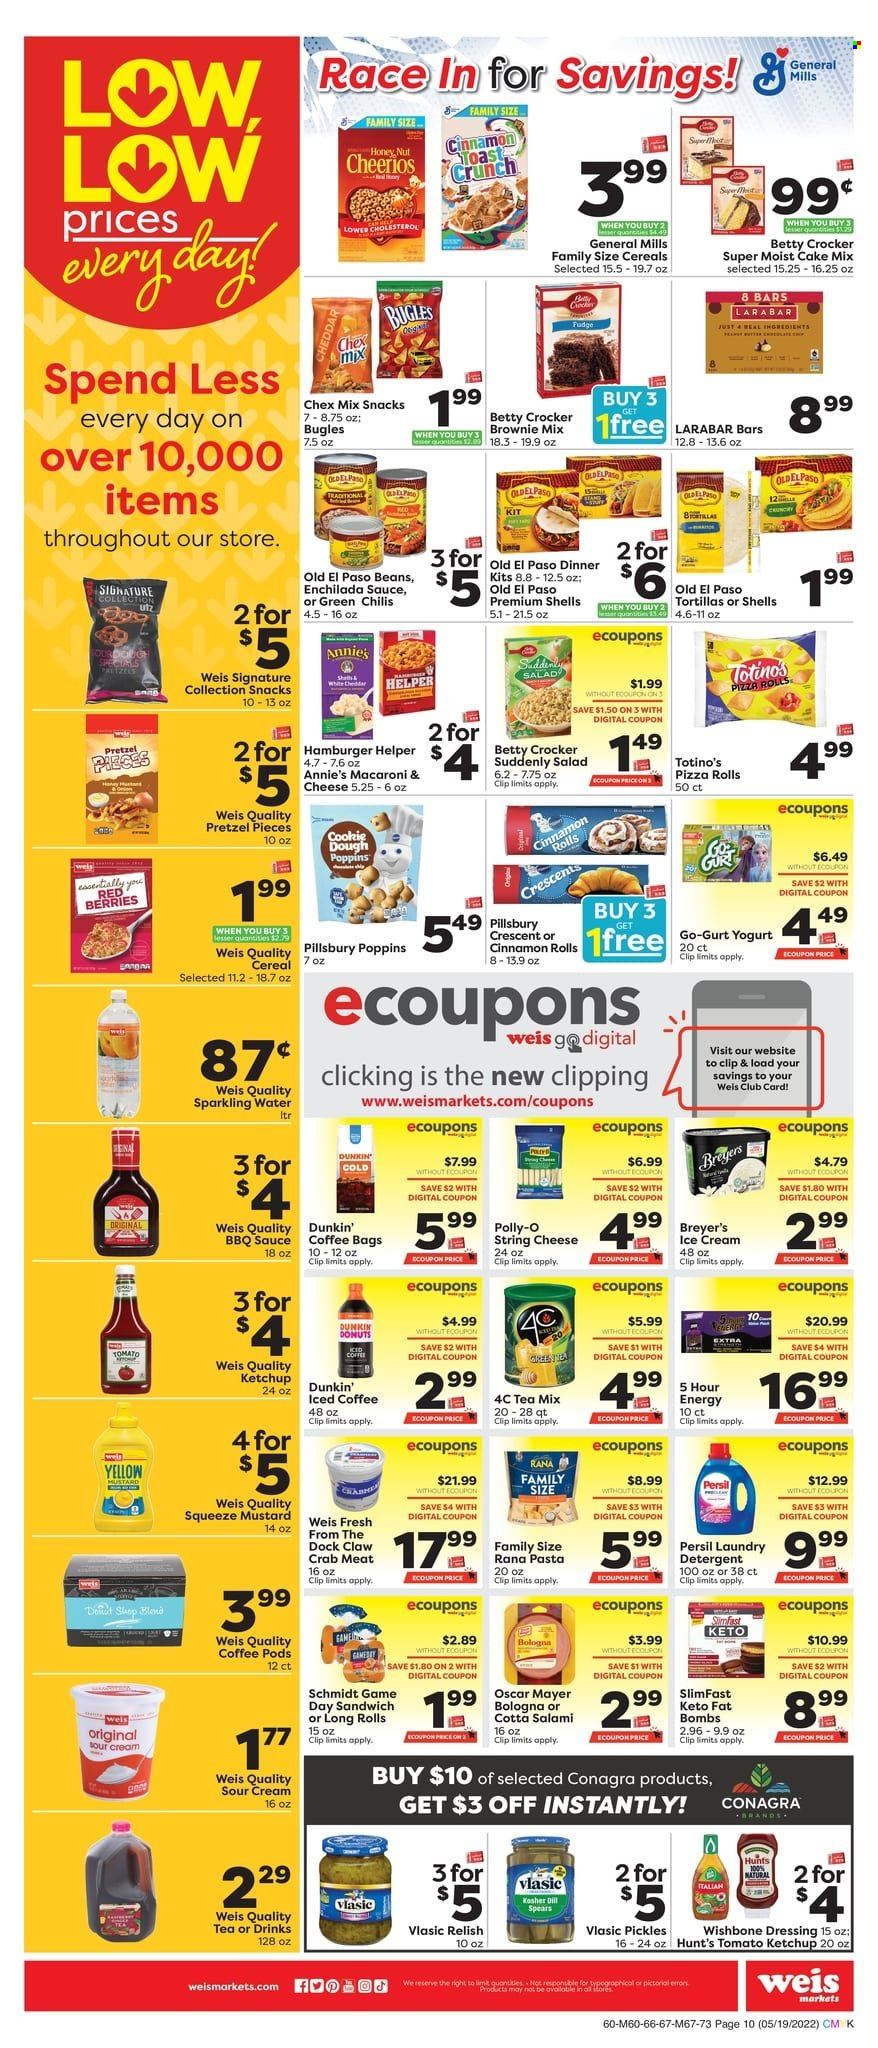 thumbnail - Weis Flyer - 05/19/2022 - 06/22/2022 - Sales products - tortillas, pretzels, pizza rolls, Old El Paso, cinnamon roll, donut, brownie mix, cake mix, salad, crab meat, crab, macaroni & cheese, pizza, sandwich, pasta, Pillsbury, dinner kit, Annie's, Slimfast, Rana, salami, bologna sausage, Oscar Mayer, string cheese, yoghurt, sour cream, ice cream, fudge, snack, Chex Mix, enchilada sauce, pickles, Cheerios, dill, BBQ sauce, mustard, ketchup, dressing, sparkling water, iced coffee, tea, coffee pods, detergent, Persil, laundry detergent. Page 10.